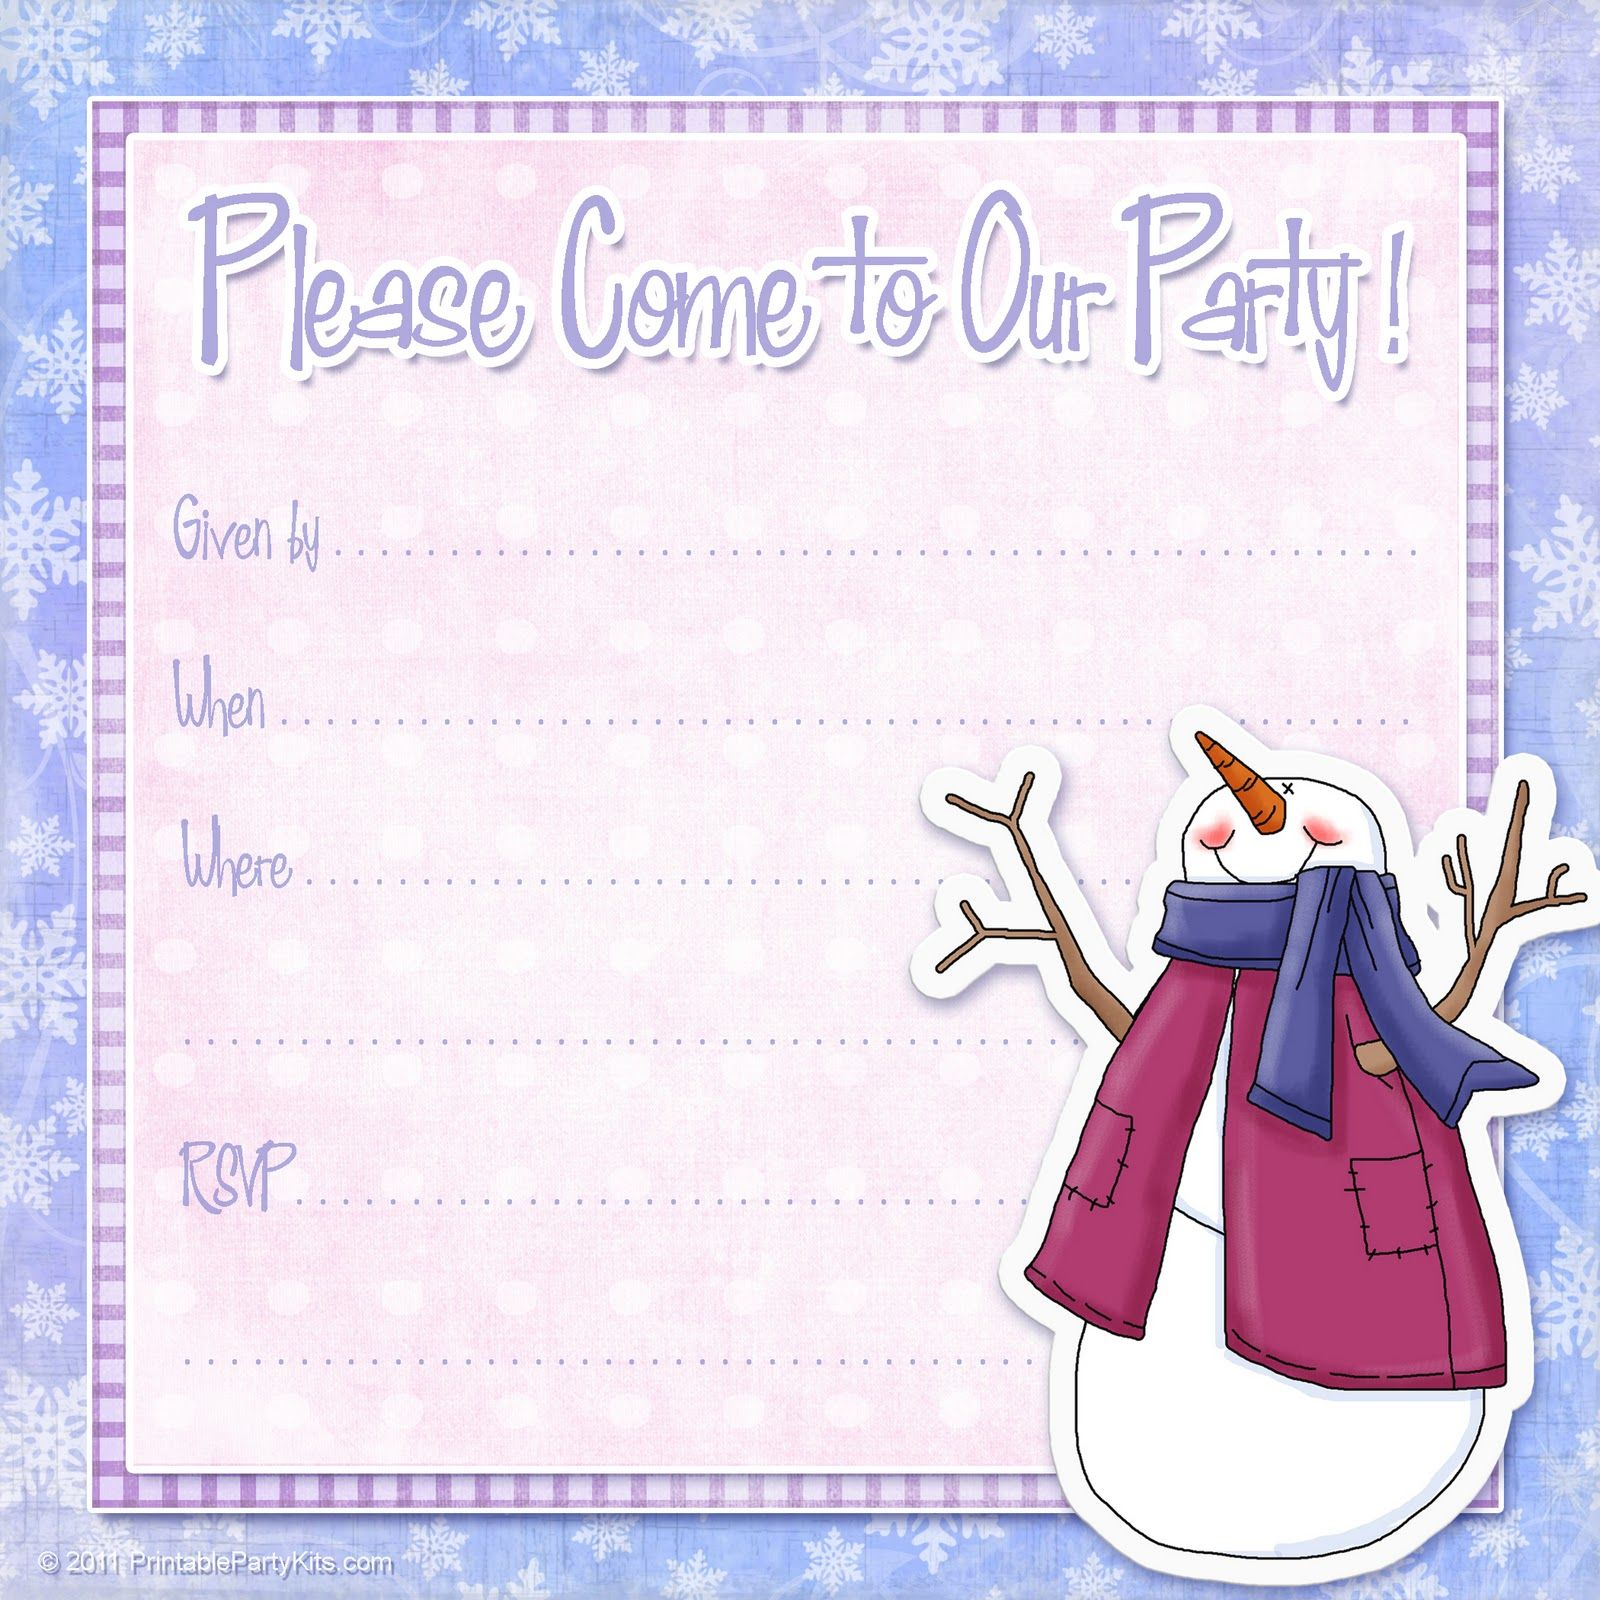 Free Printable Party Invitations Free Snowman Invite Template For A pertaining to dimensions 1600 X 1600